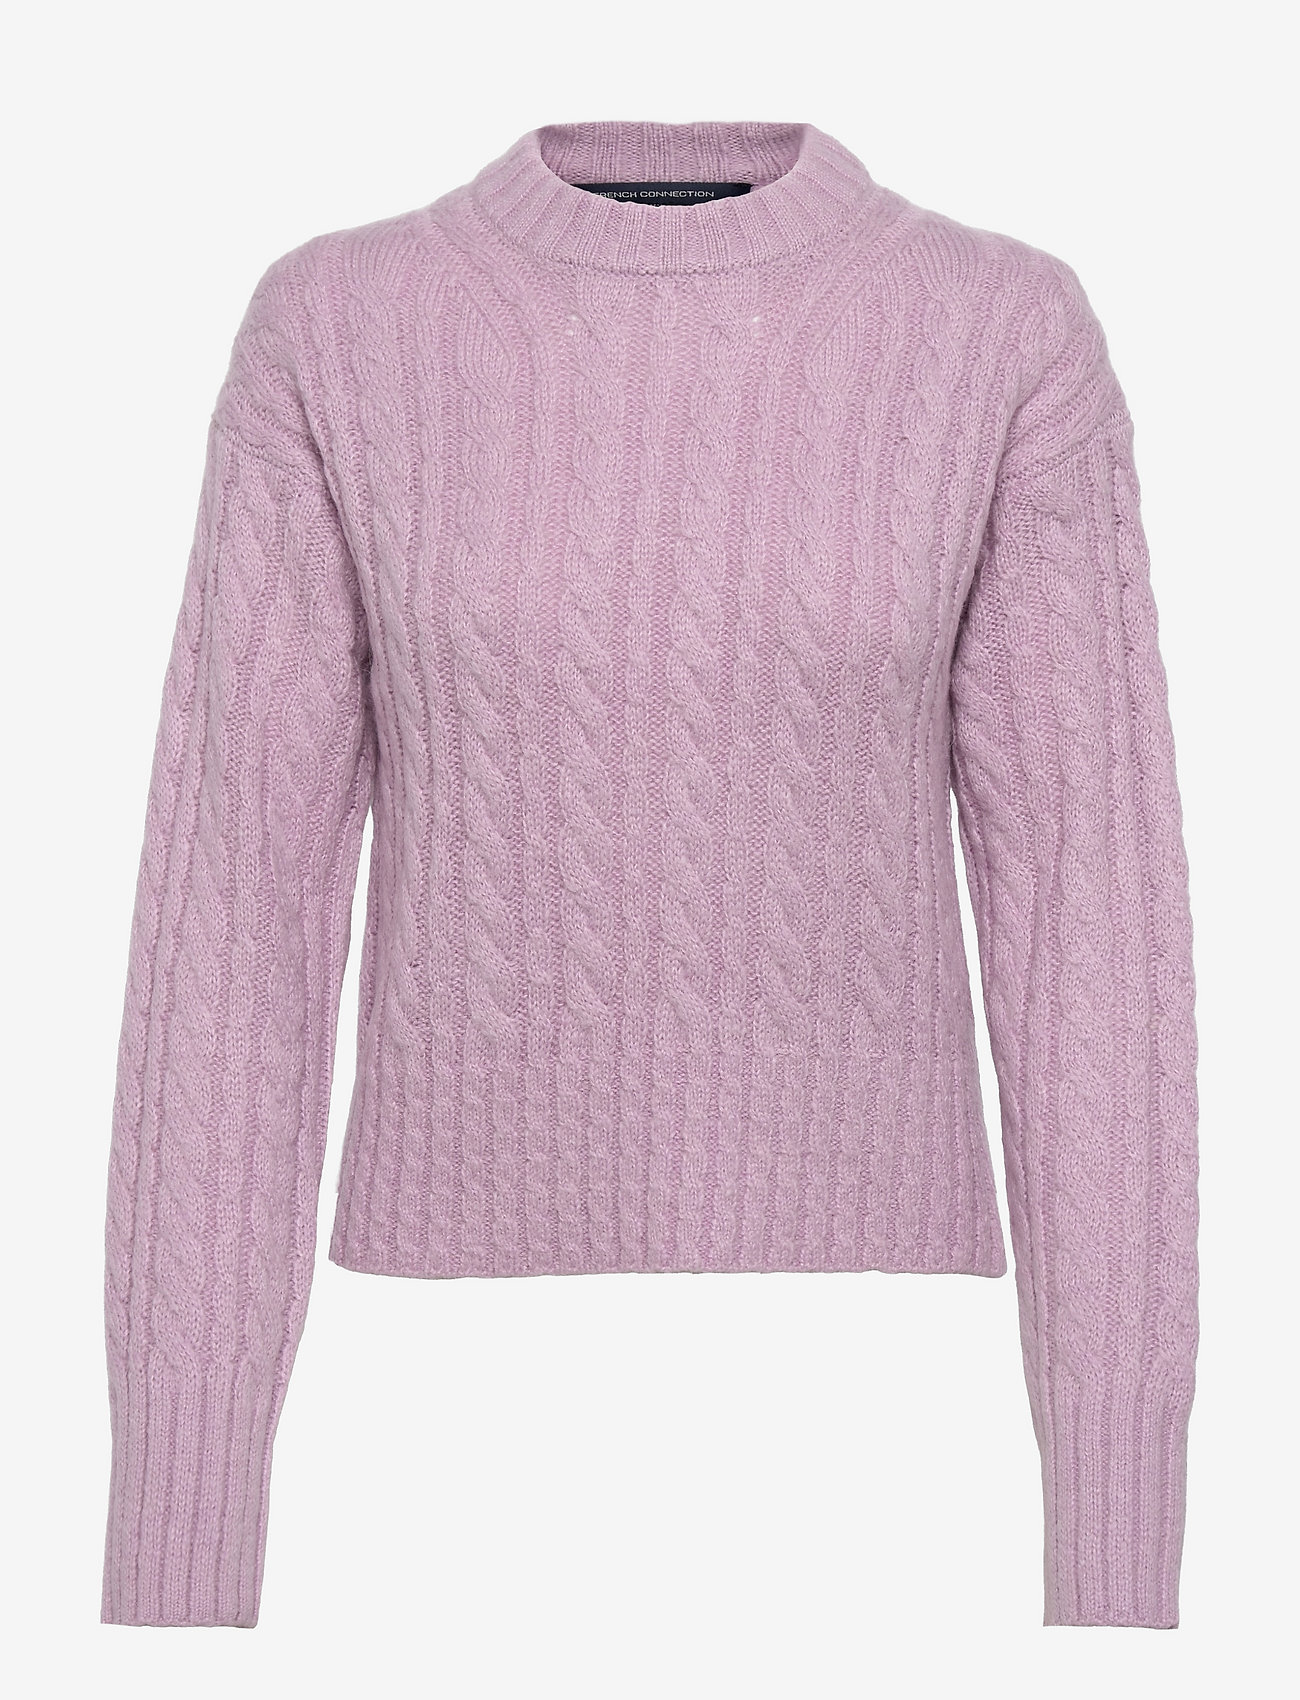 French Connection - JACQUELINE CREW NK JUMPER - pullover - violet tulle - 0